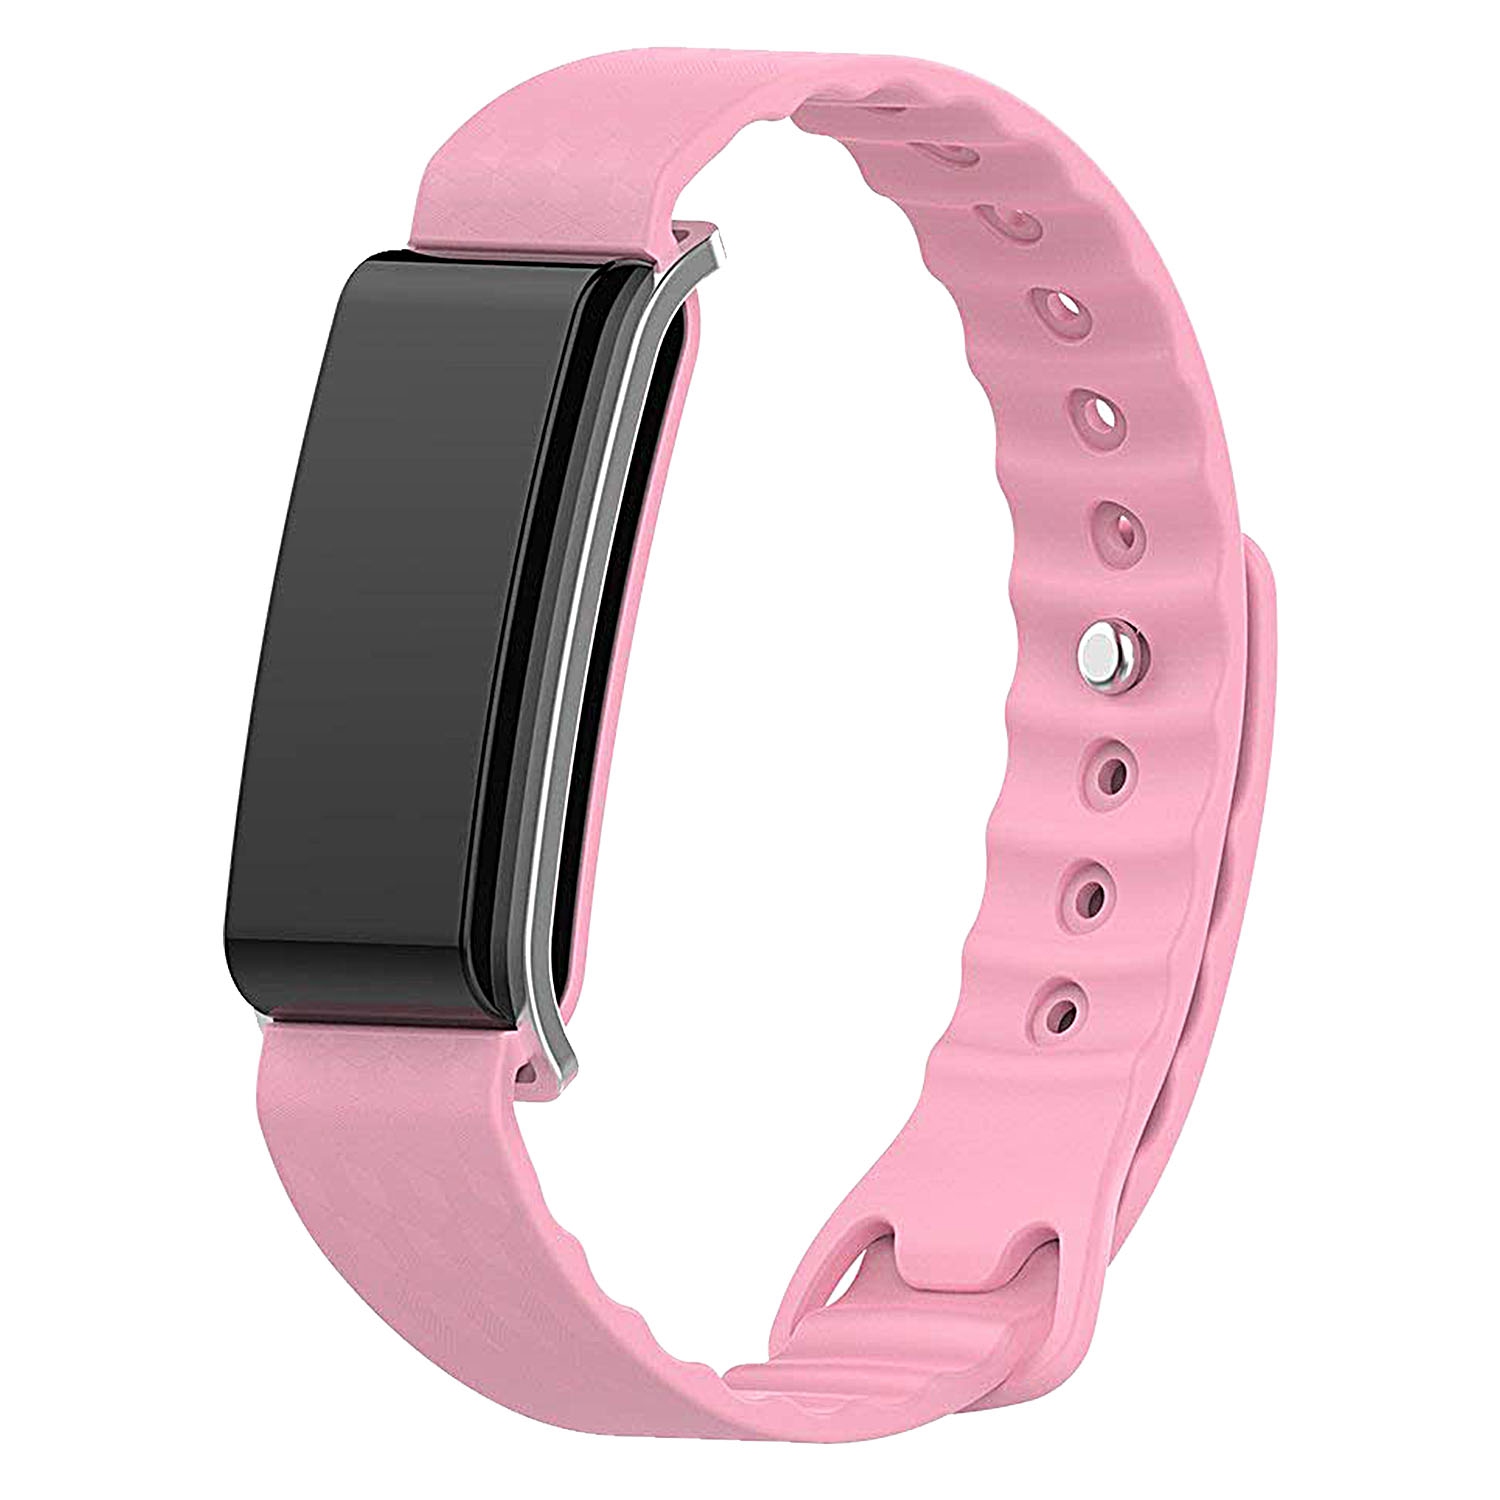 StrapsCo Classic Silicone Rubber Replacement Watch Strap for Huawei Honor/Color Band A2 - Pink